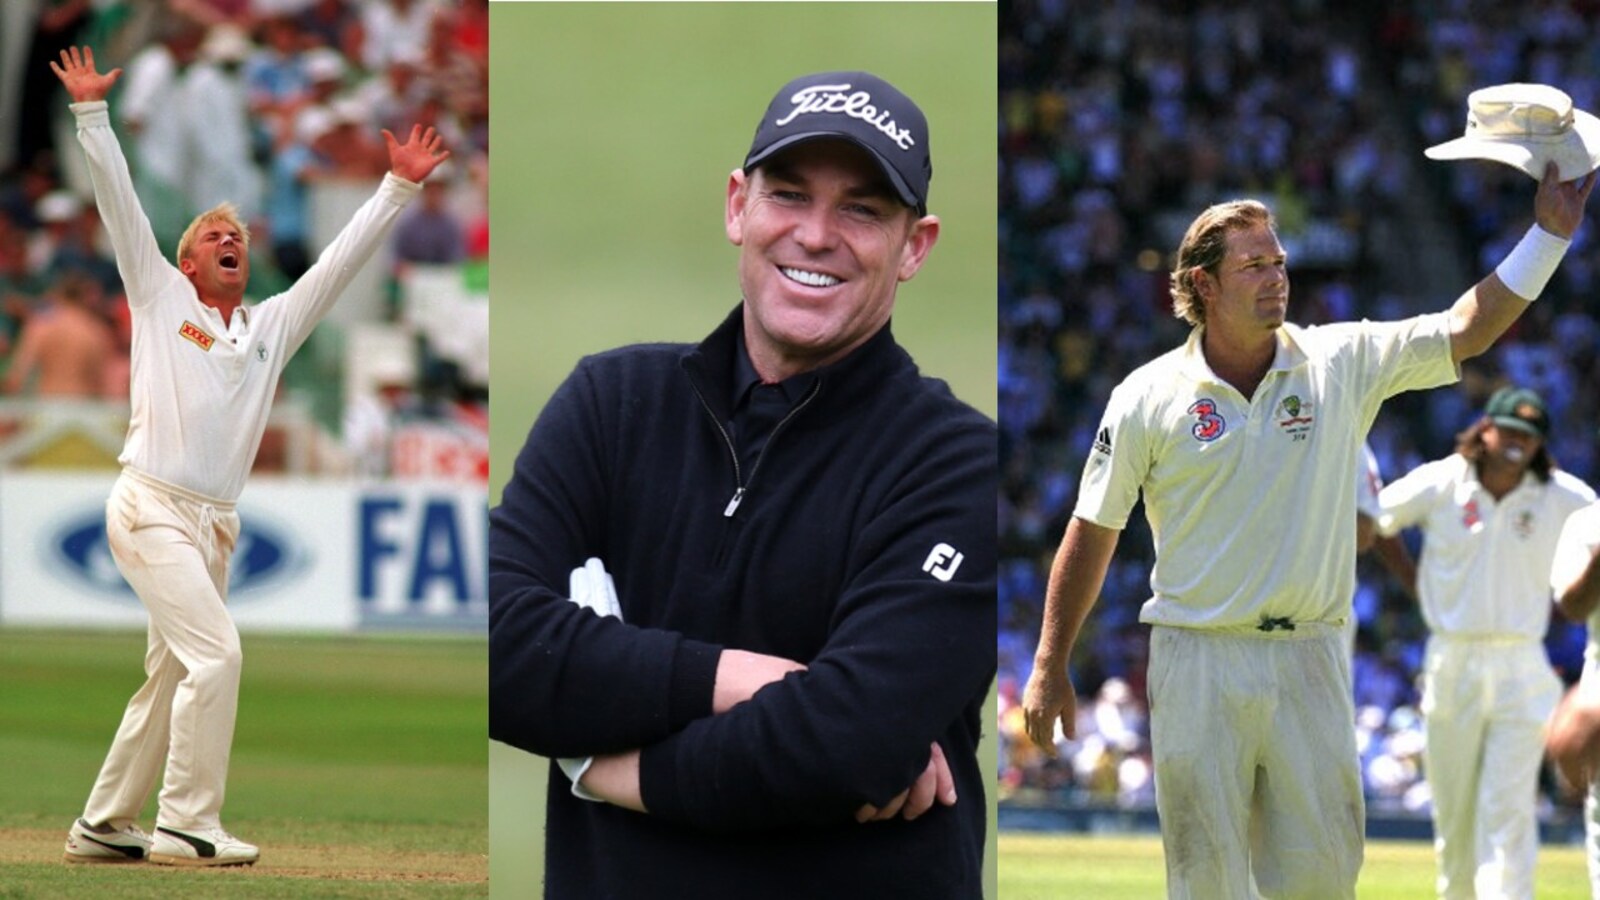 Shane Warne (1969-2022) | A pictorial tribute to one of the greatest  leg-spinners of all time